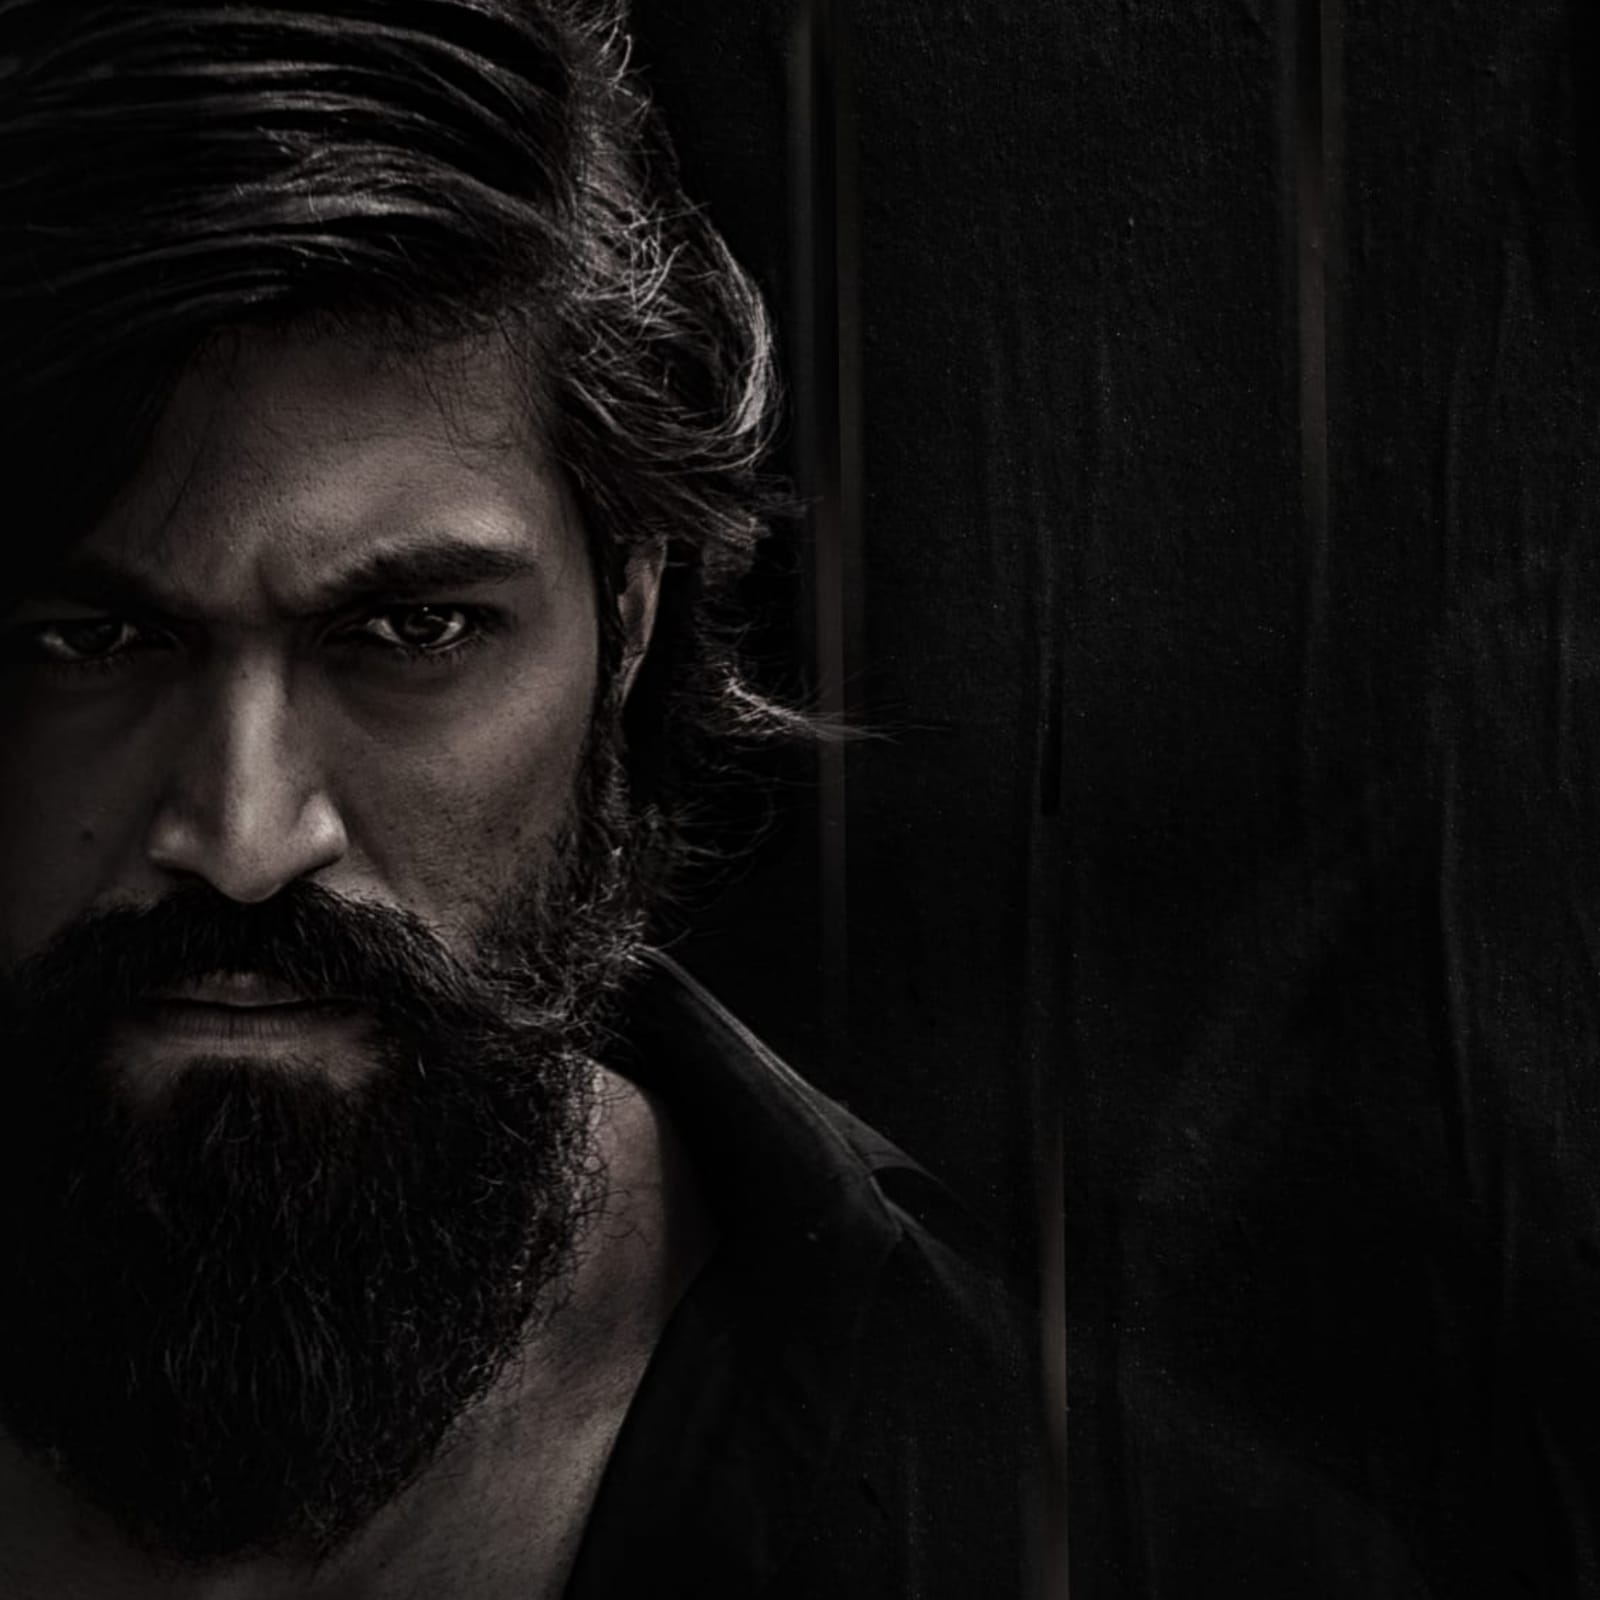 Kgf star yash says his character rocky draws inspiration from amitabh bachchans films